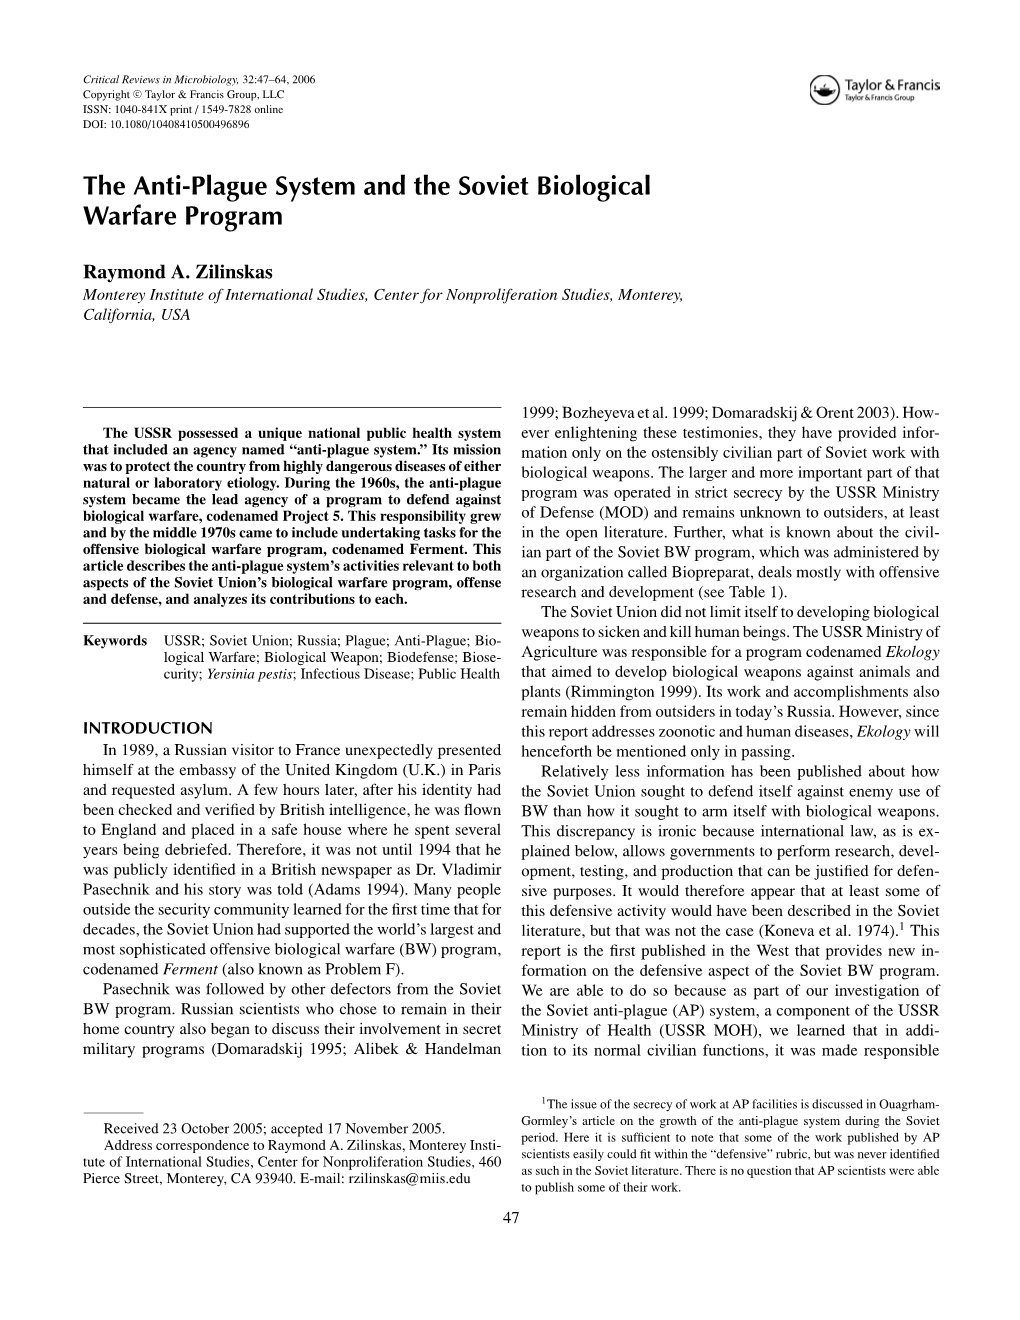 The Anti-Plague System and the Soviet Biological Warfare Program